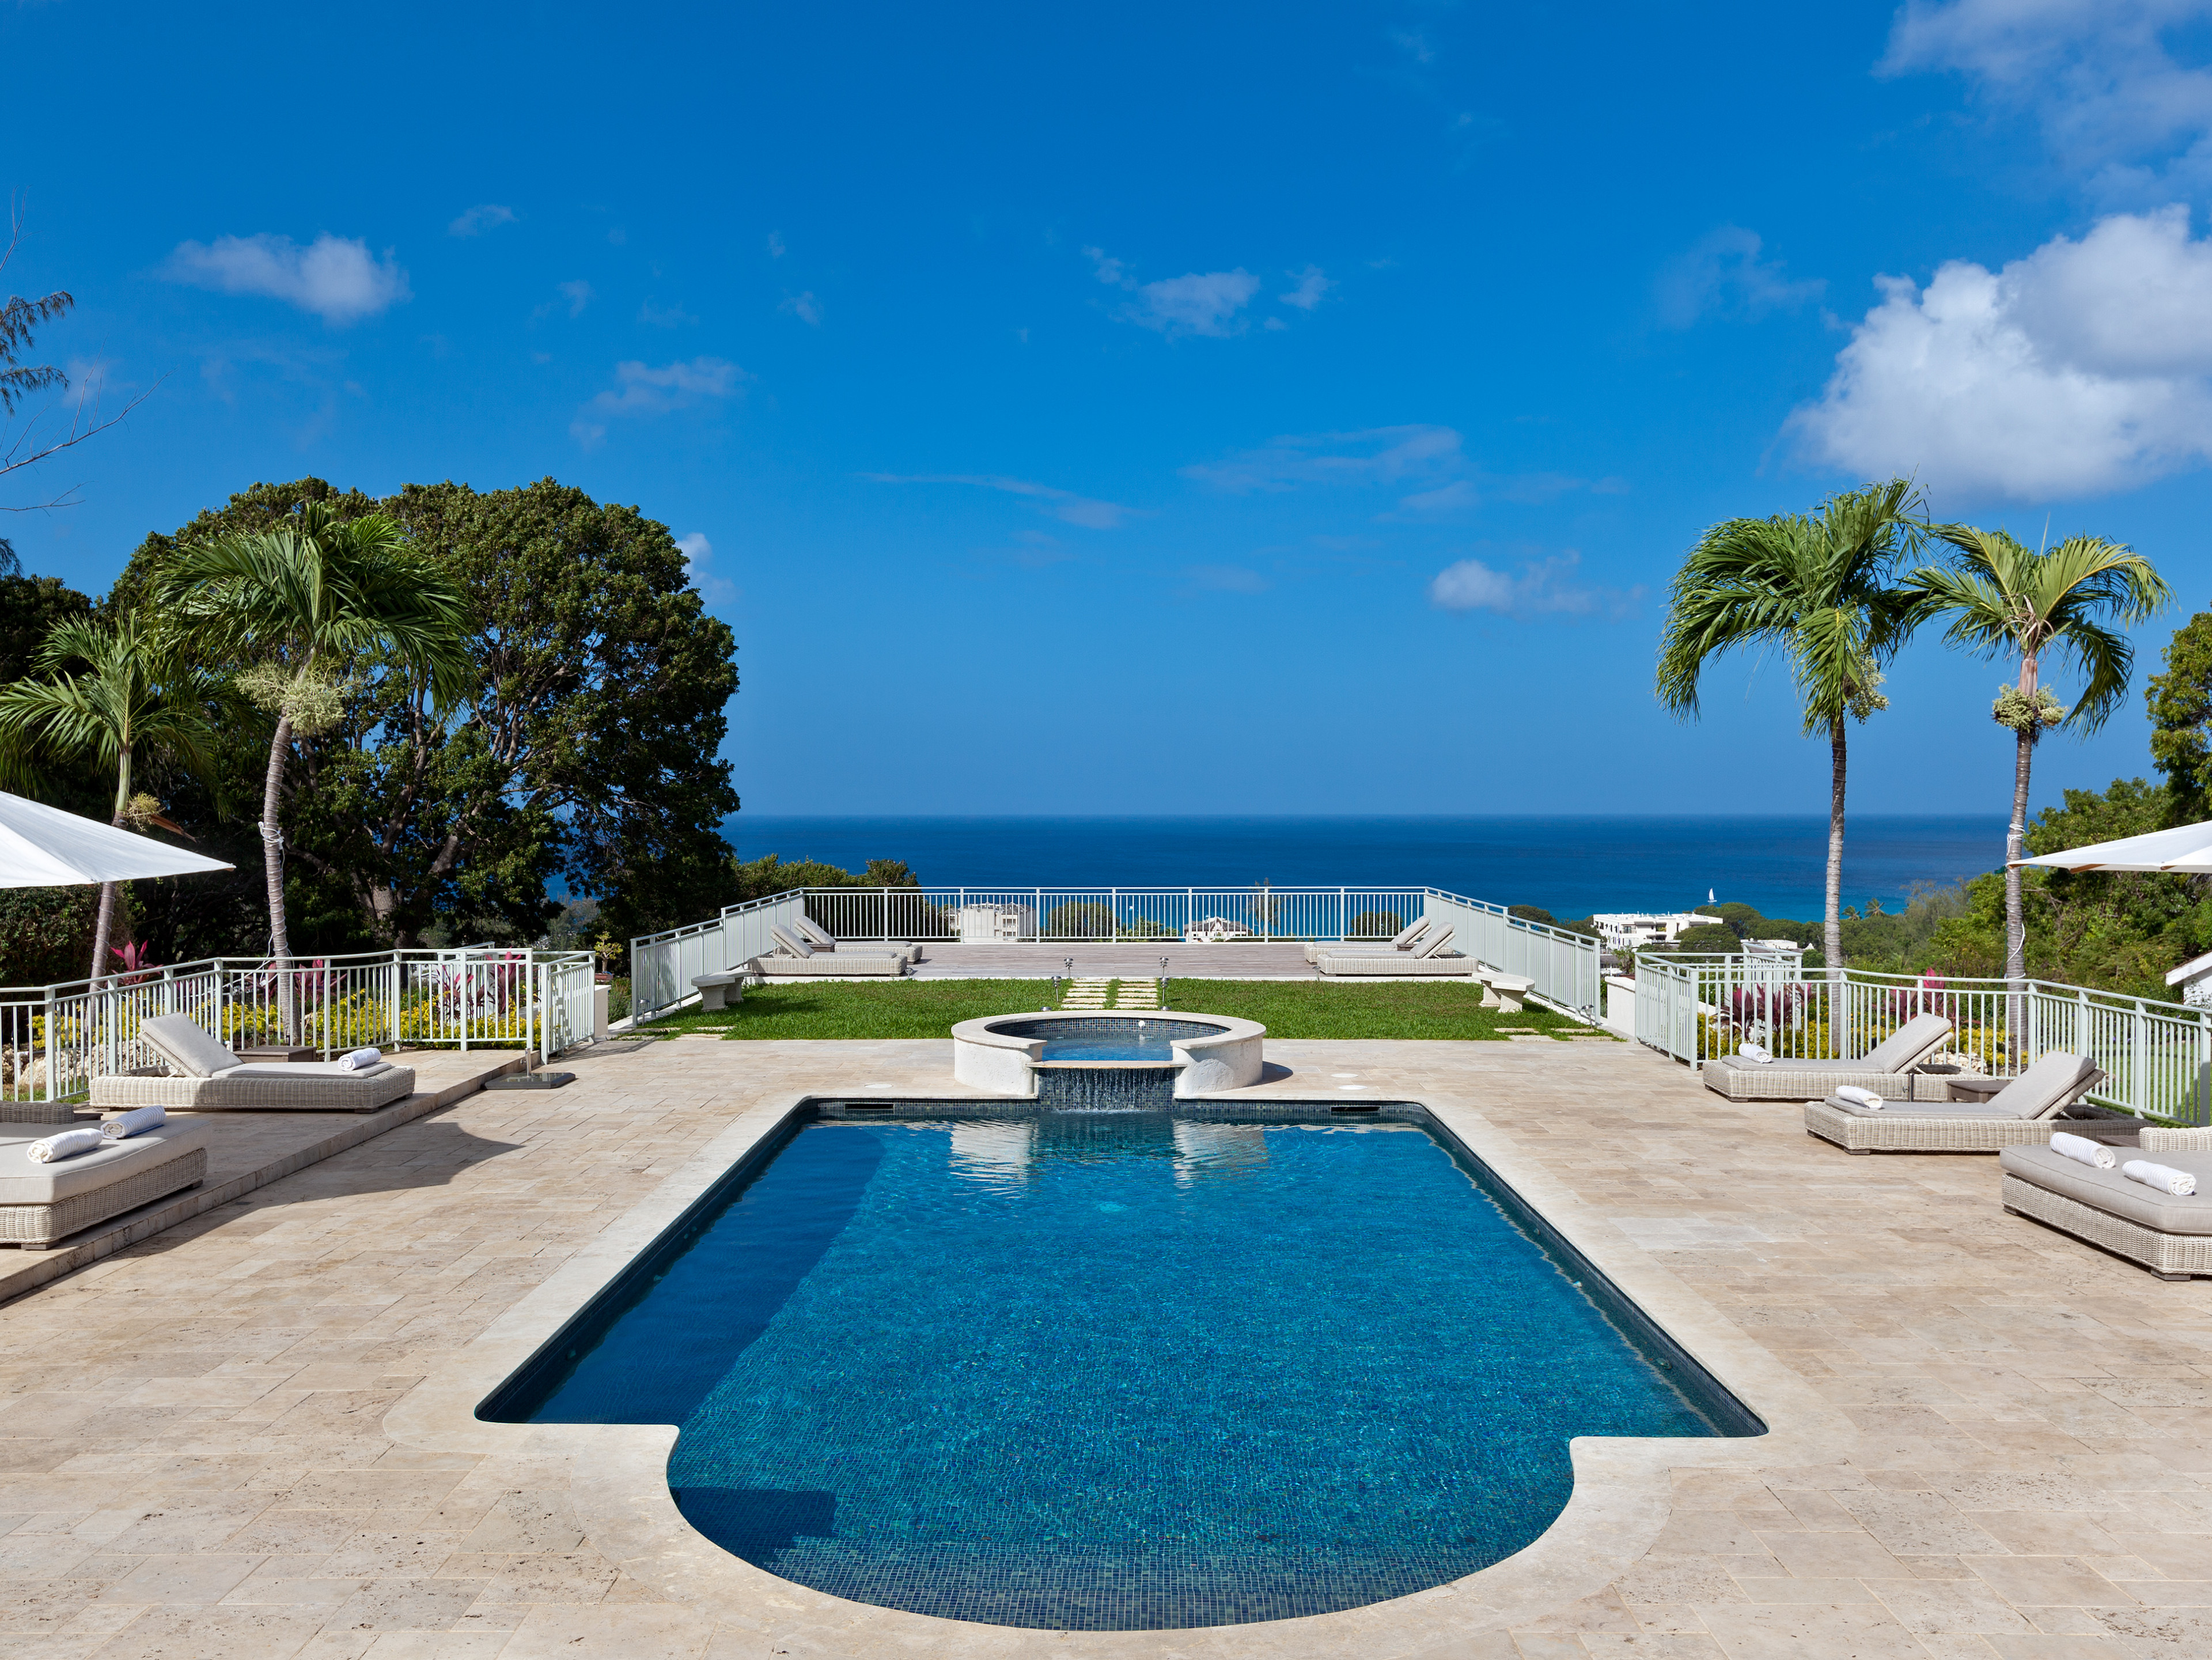 Villas in Barbados with private pools High Breeze